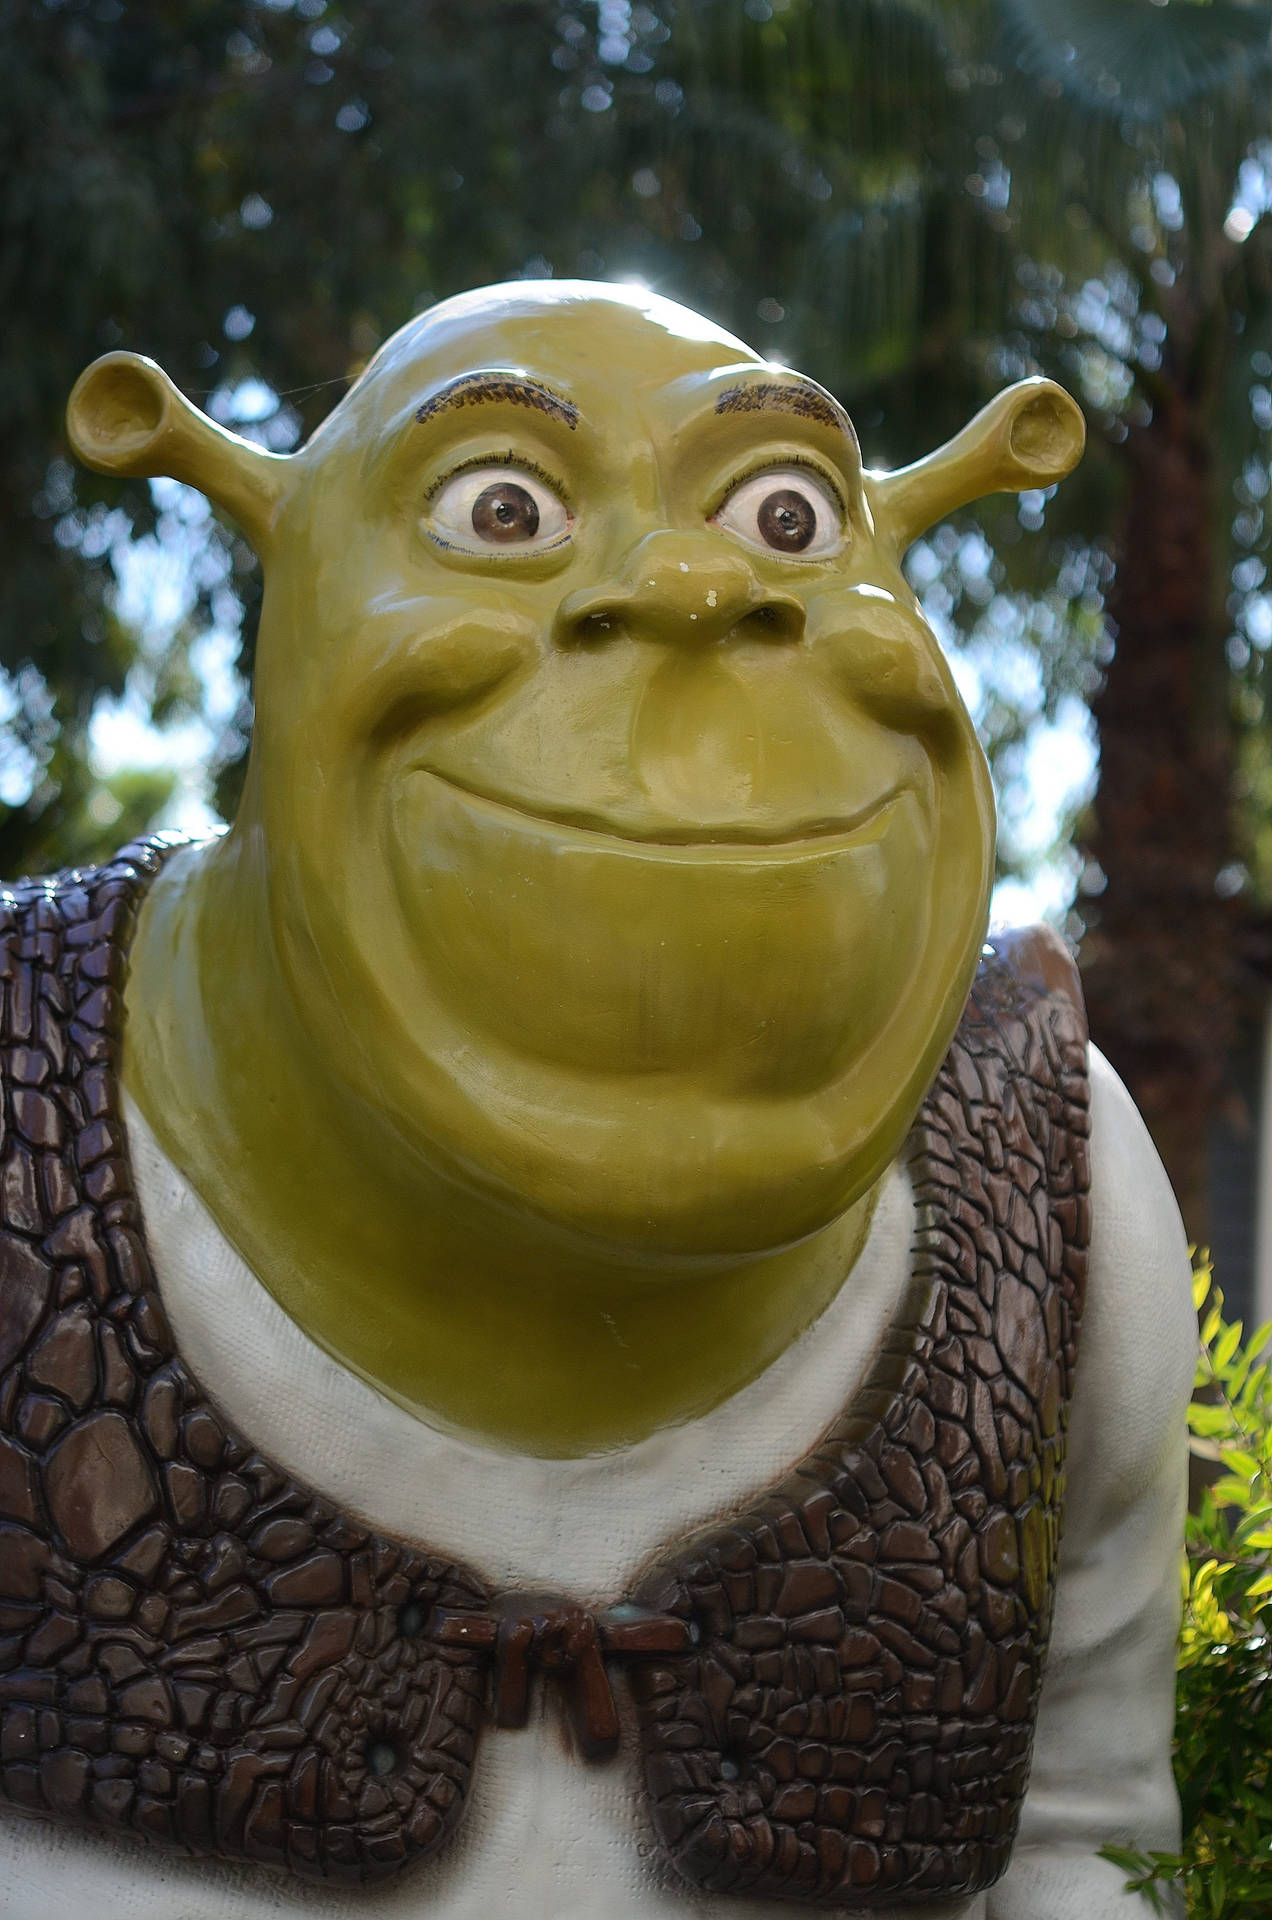 Shrek On Adventure In His Enchanted Forest Domain Wallpaper